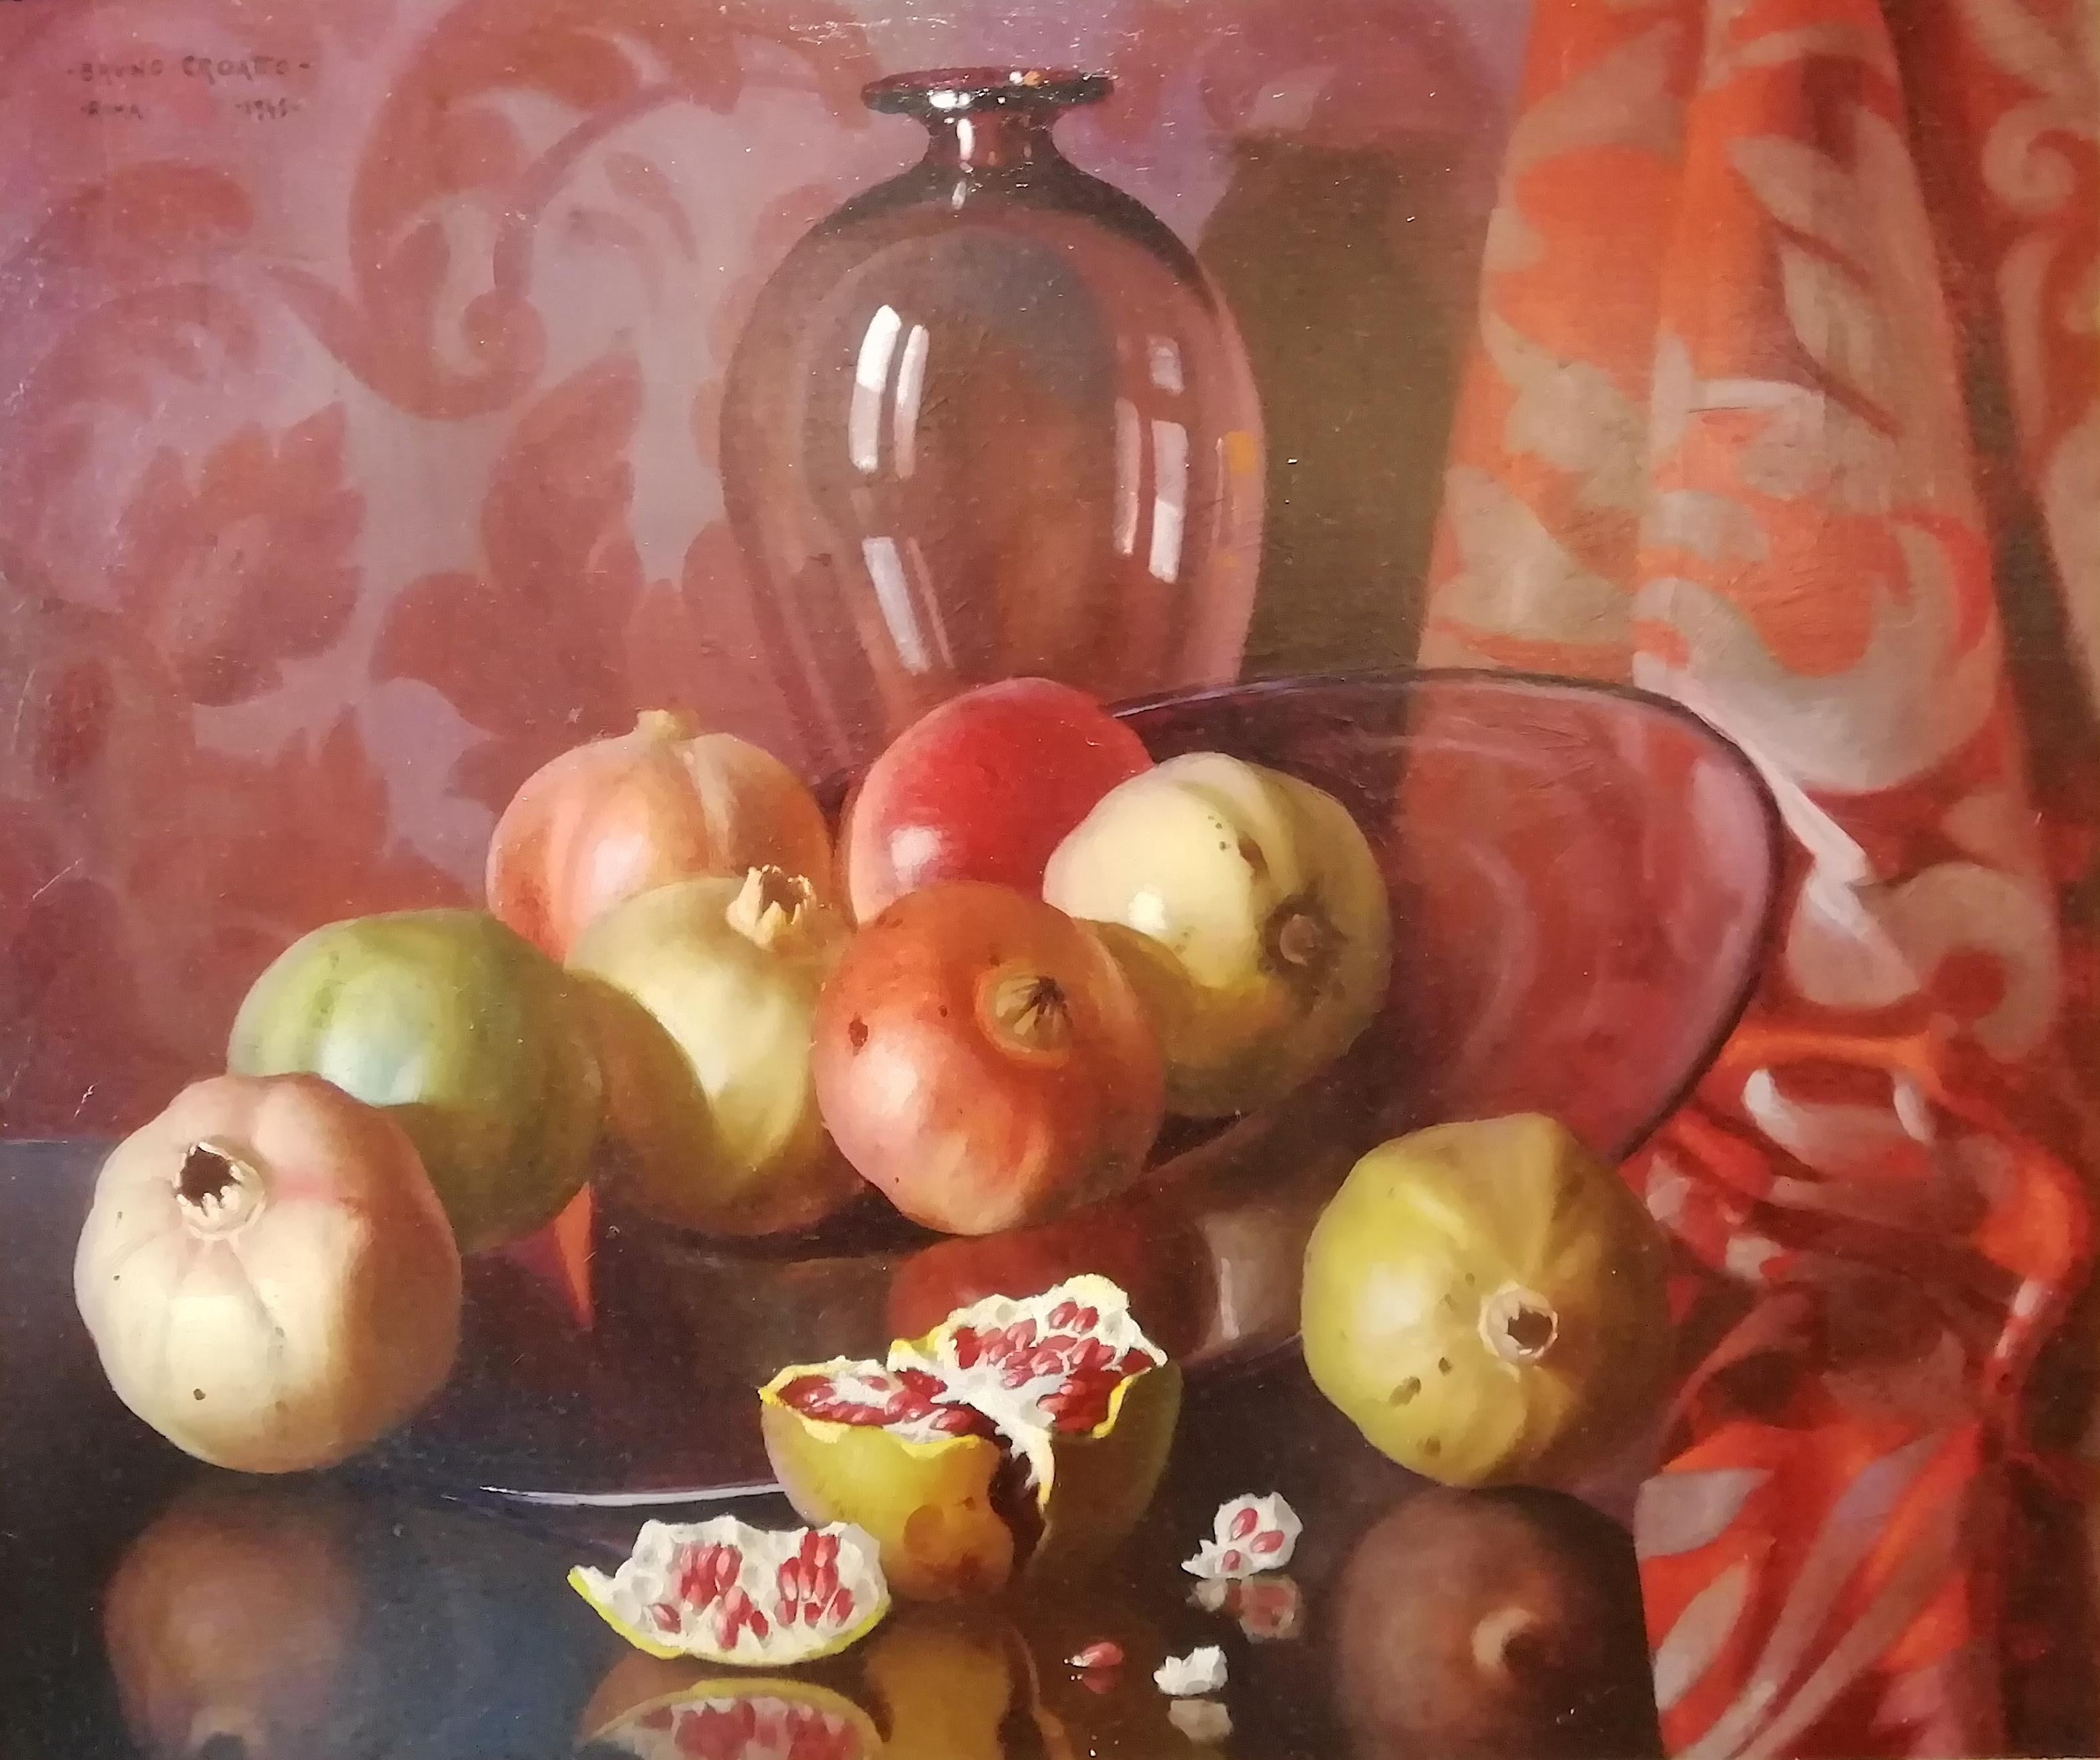 Bruno Croatto (Trieste 1875 - Roma 1948)
Still Life with Pomegranates
Signed and dated top left: Bruno Croatto Roma 1945

Bruno Croatto completed his training in Trieste and later perfected his career in Munich by starting in 1897 (L'eletta